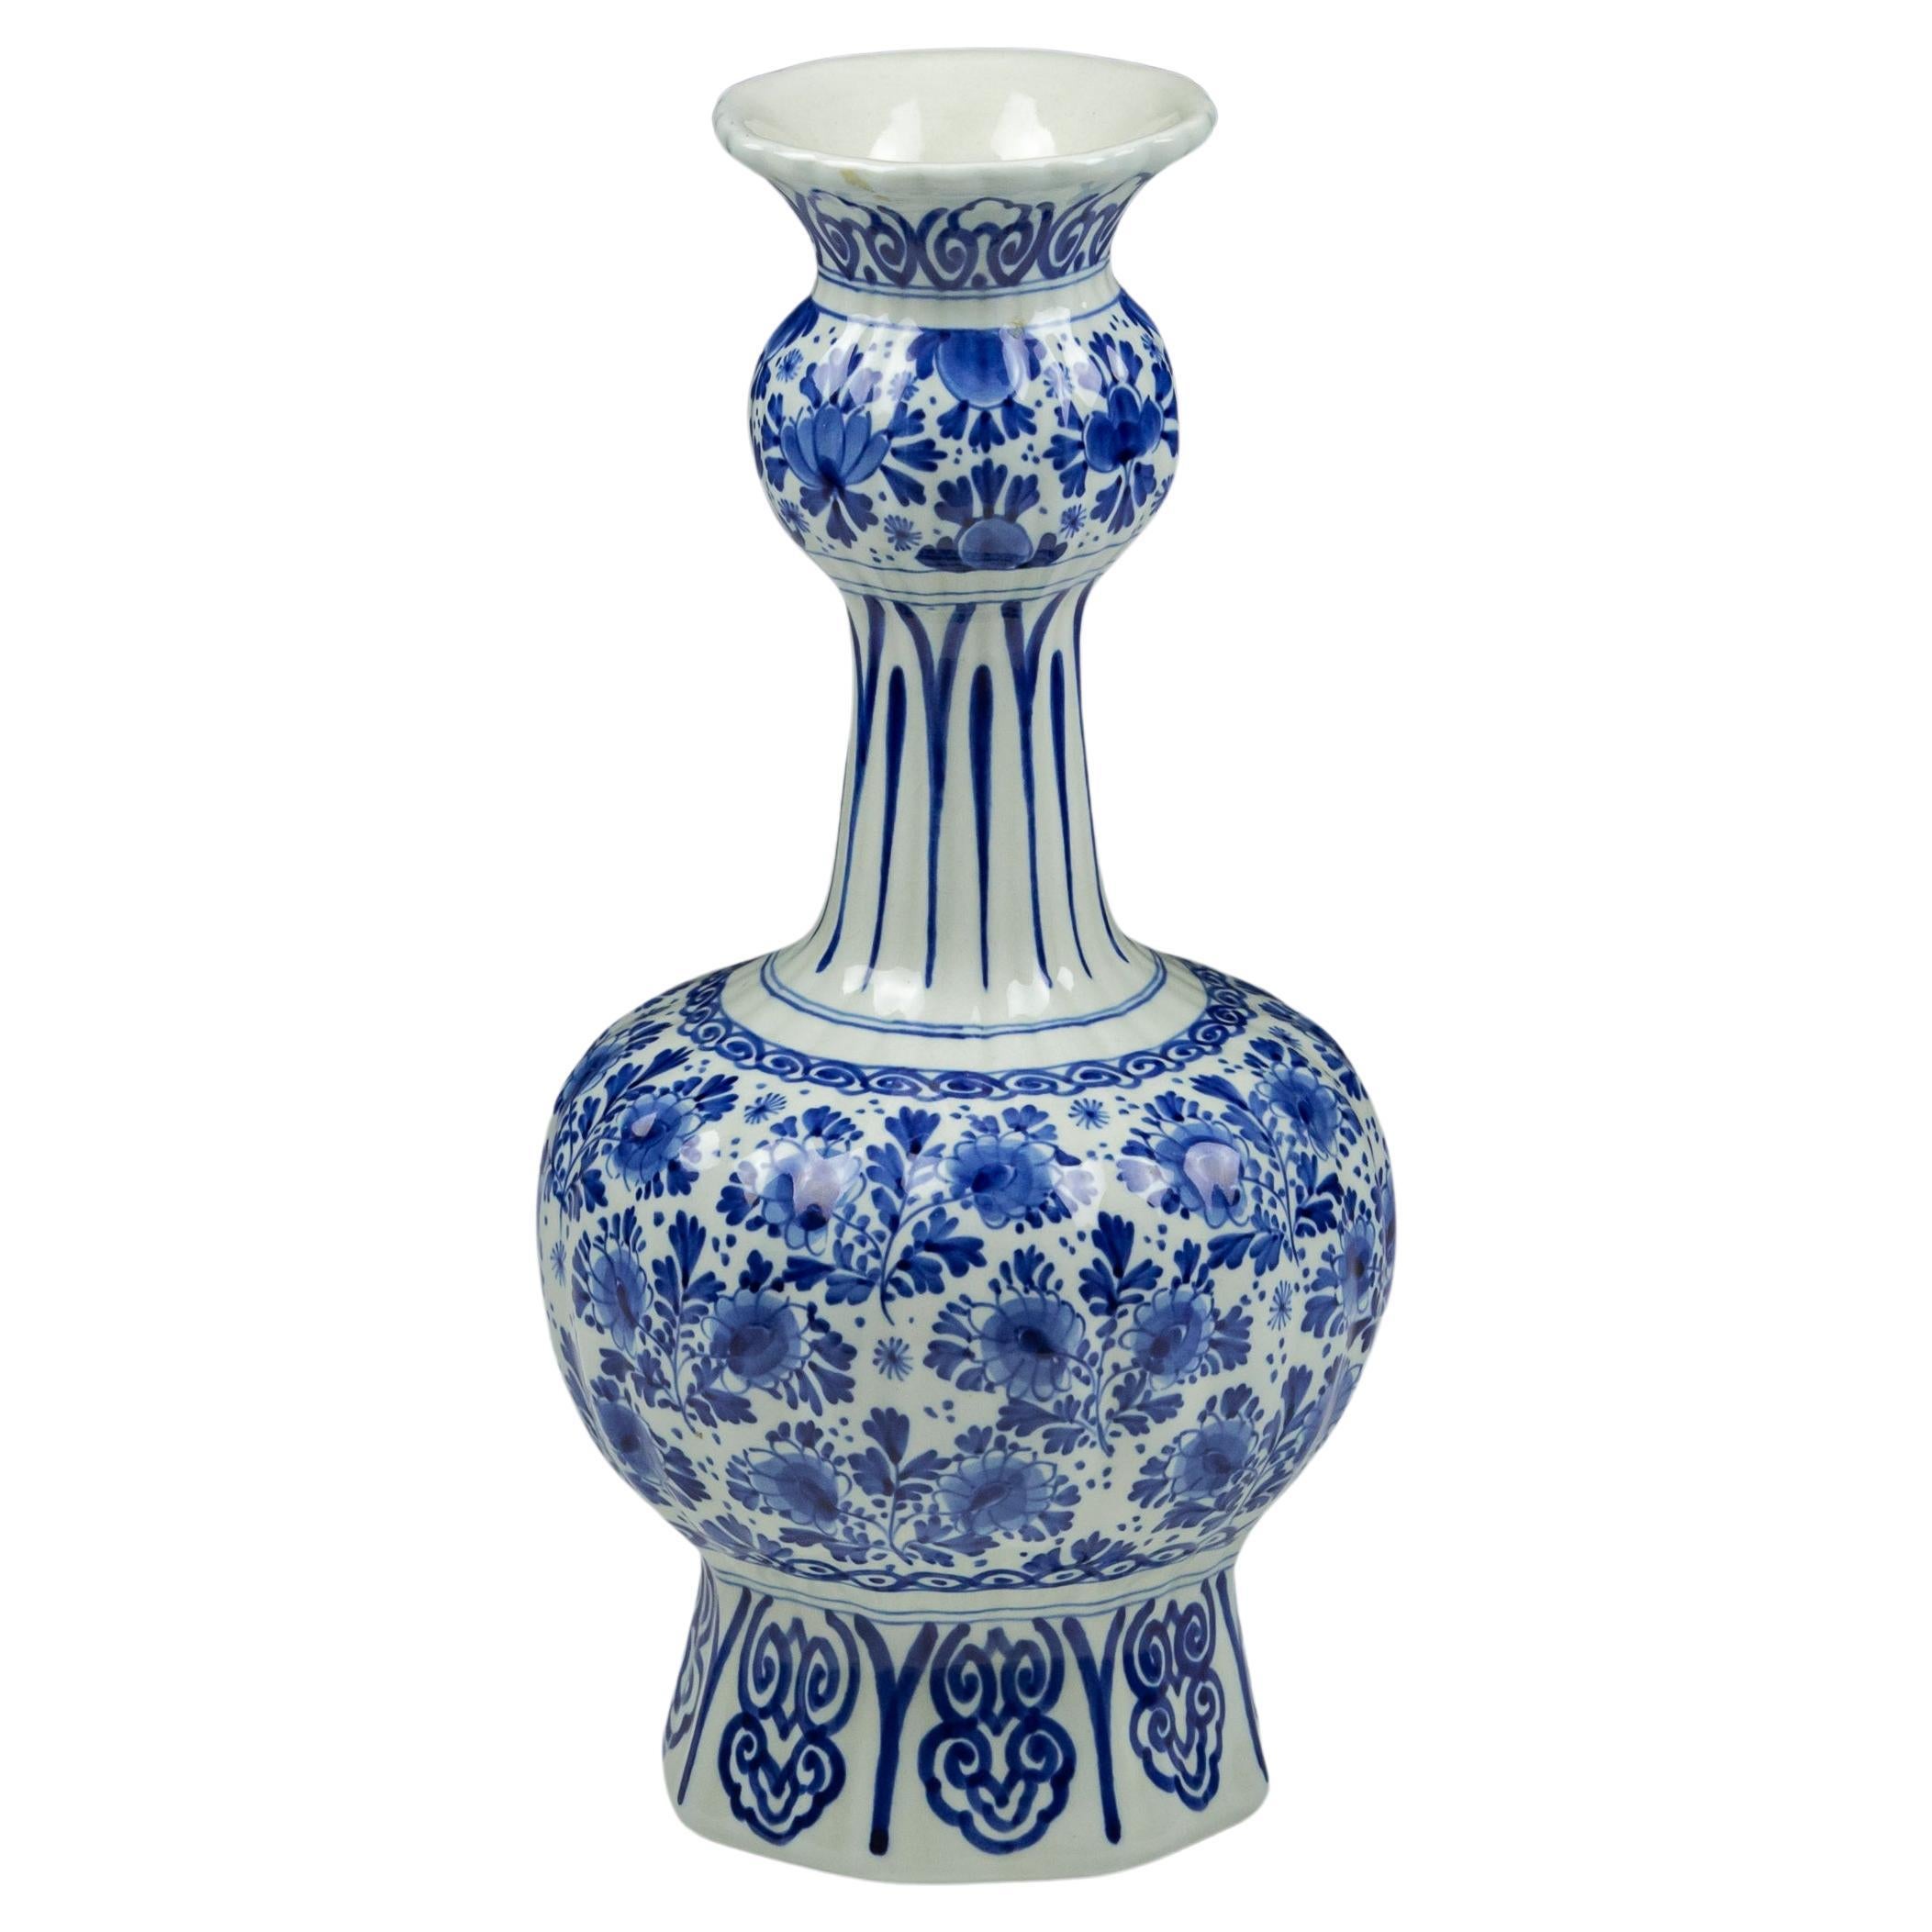 20th Century Blue and White Delft Knobbelvaas or Gourd Vase